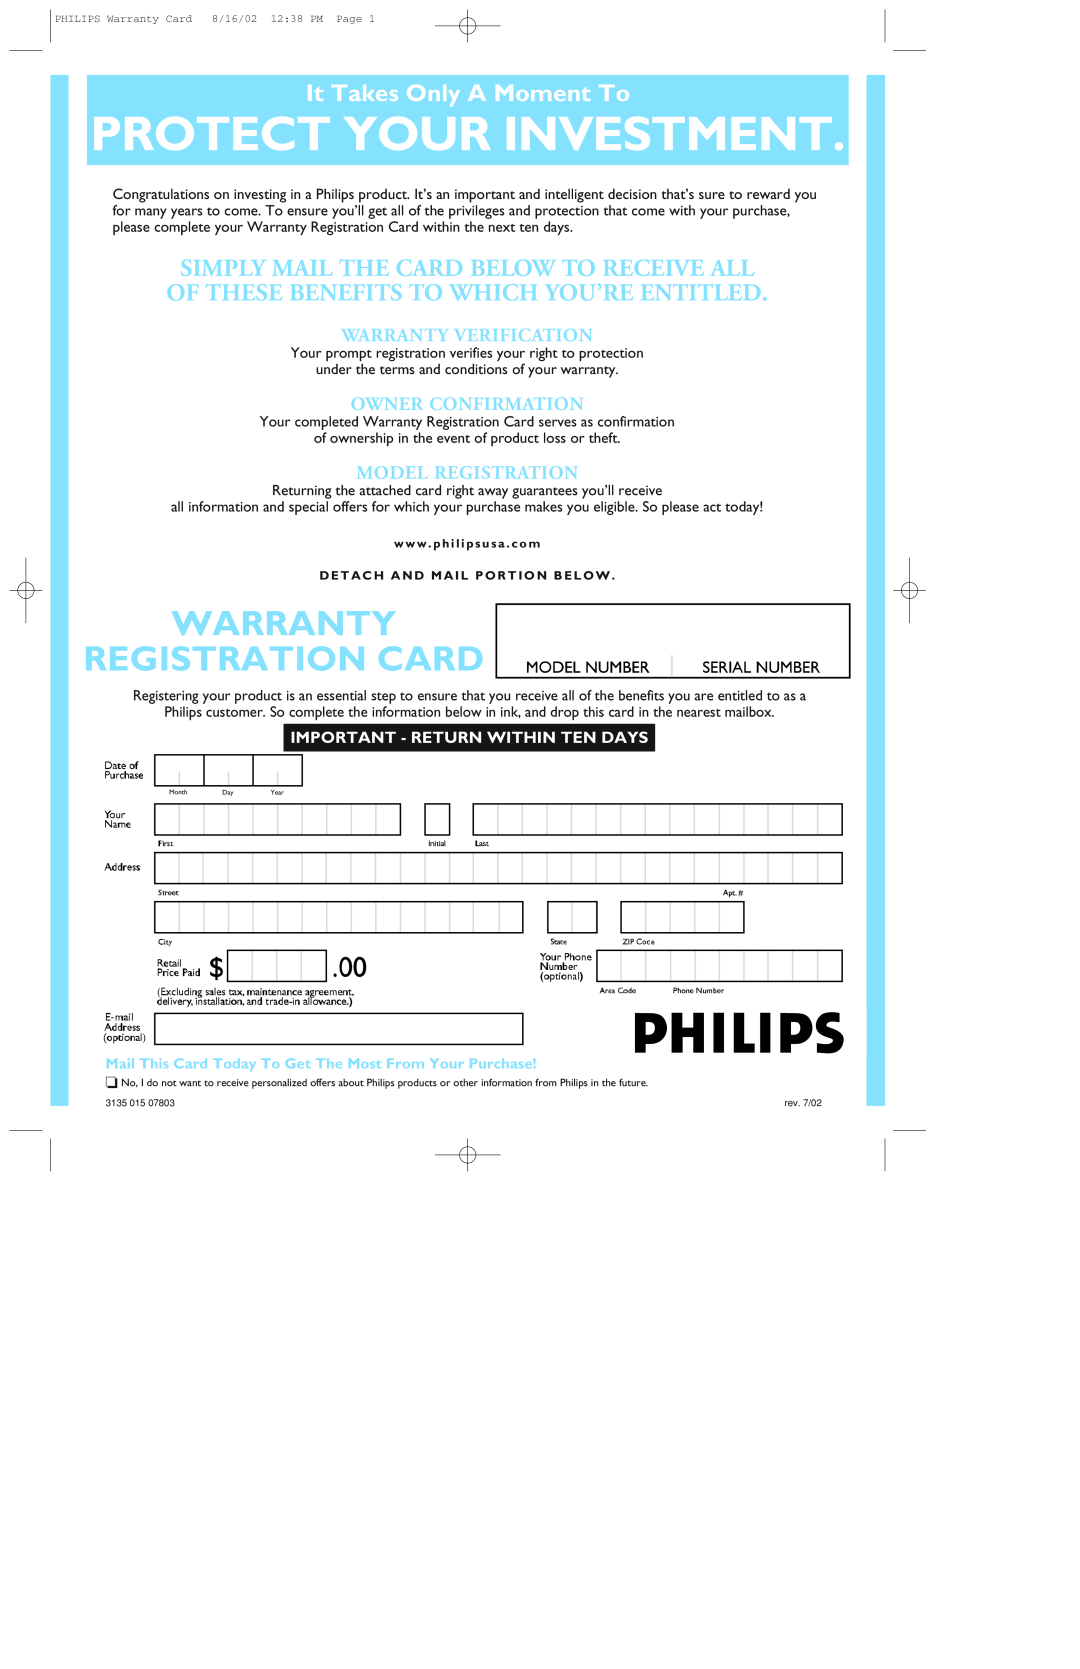 Philips 109E5 Protect Your Investment, Warranty Registration Card, It Takes Only A Moment To, Warranty Verification 